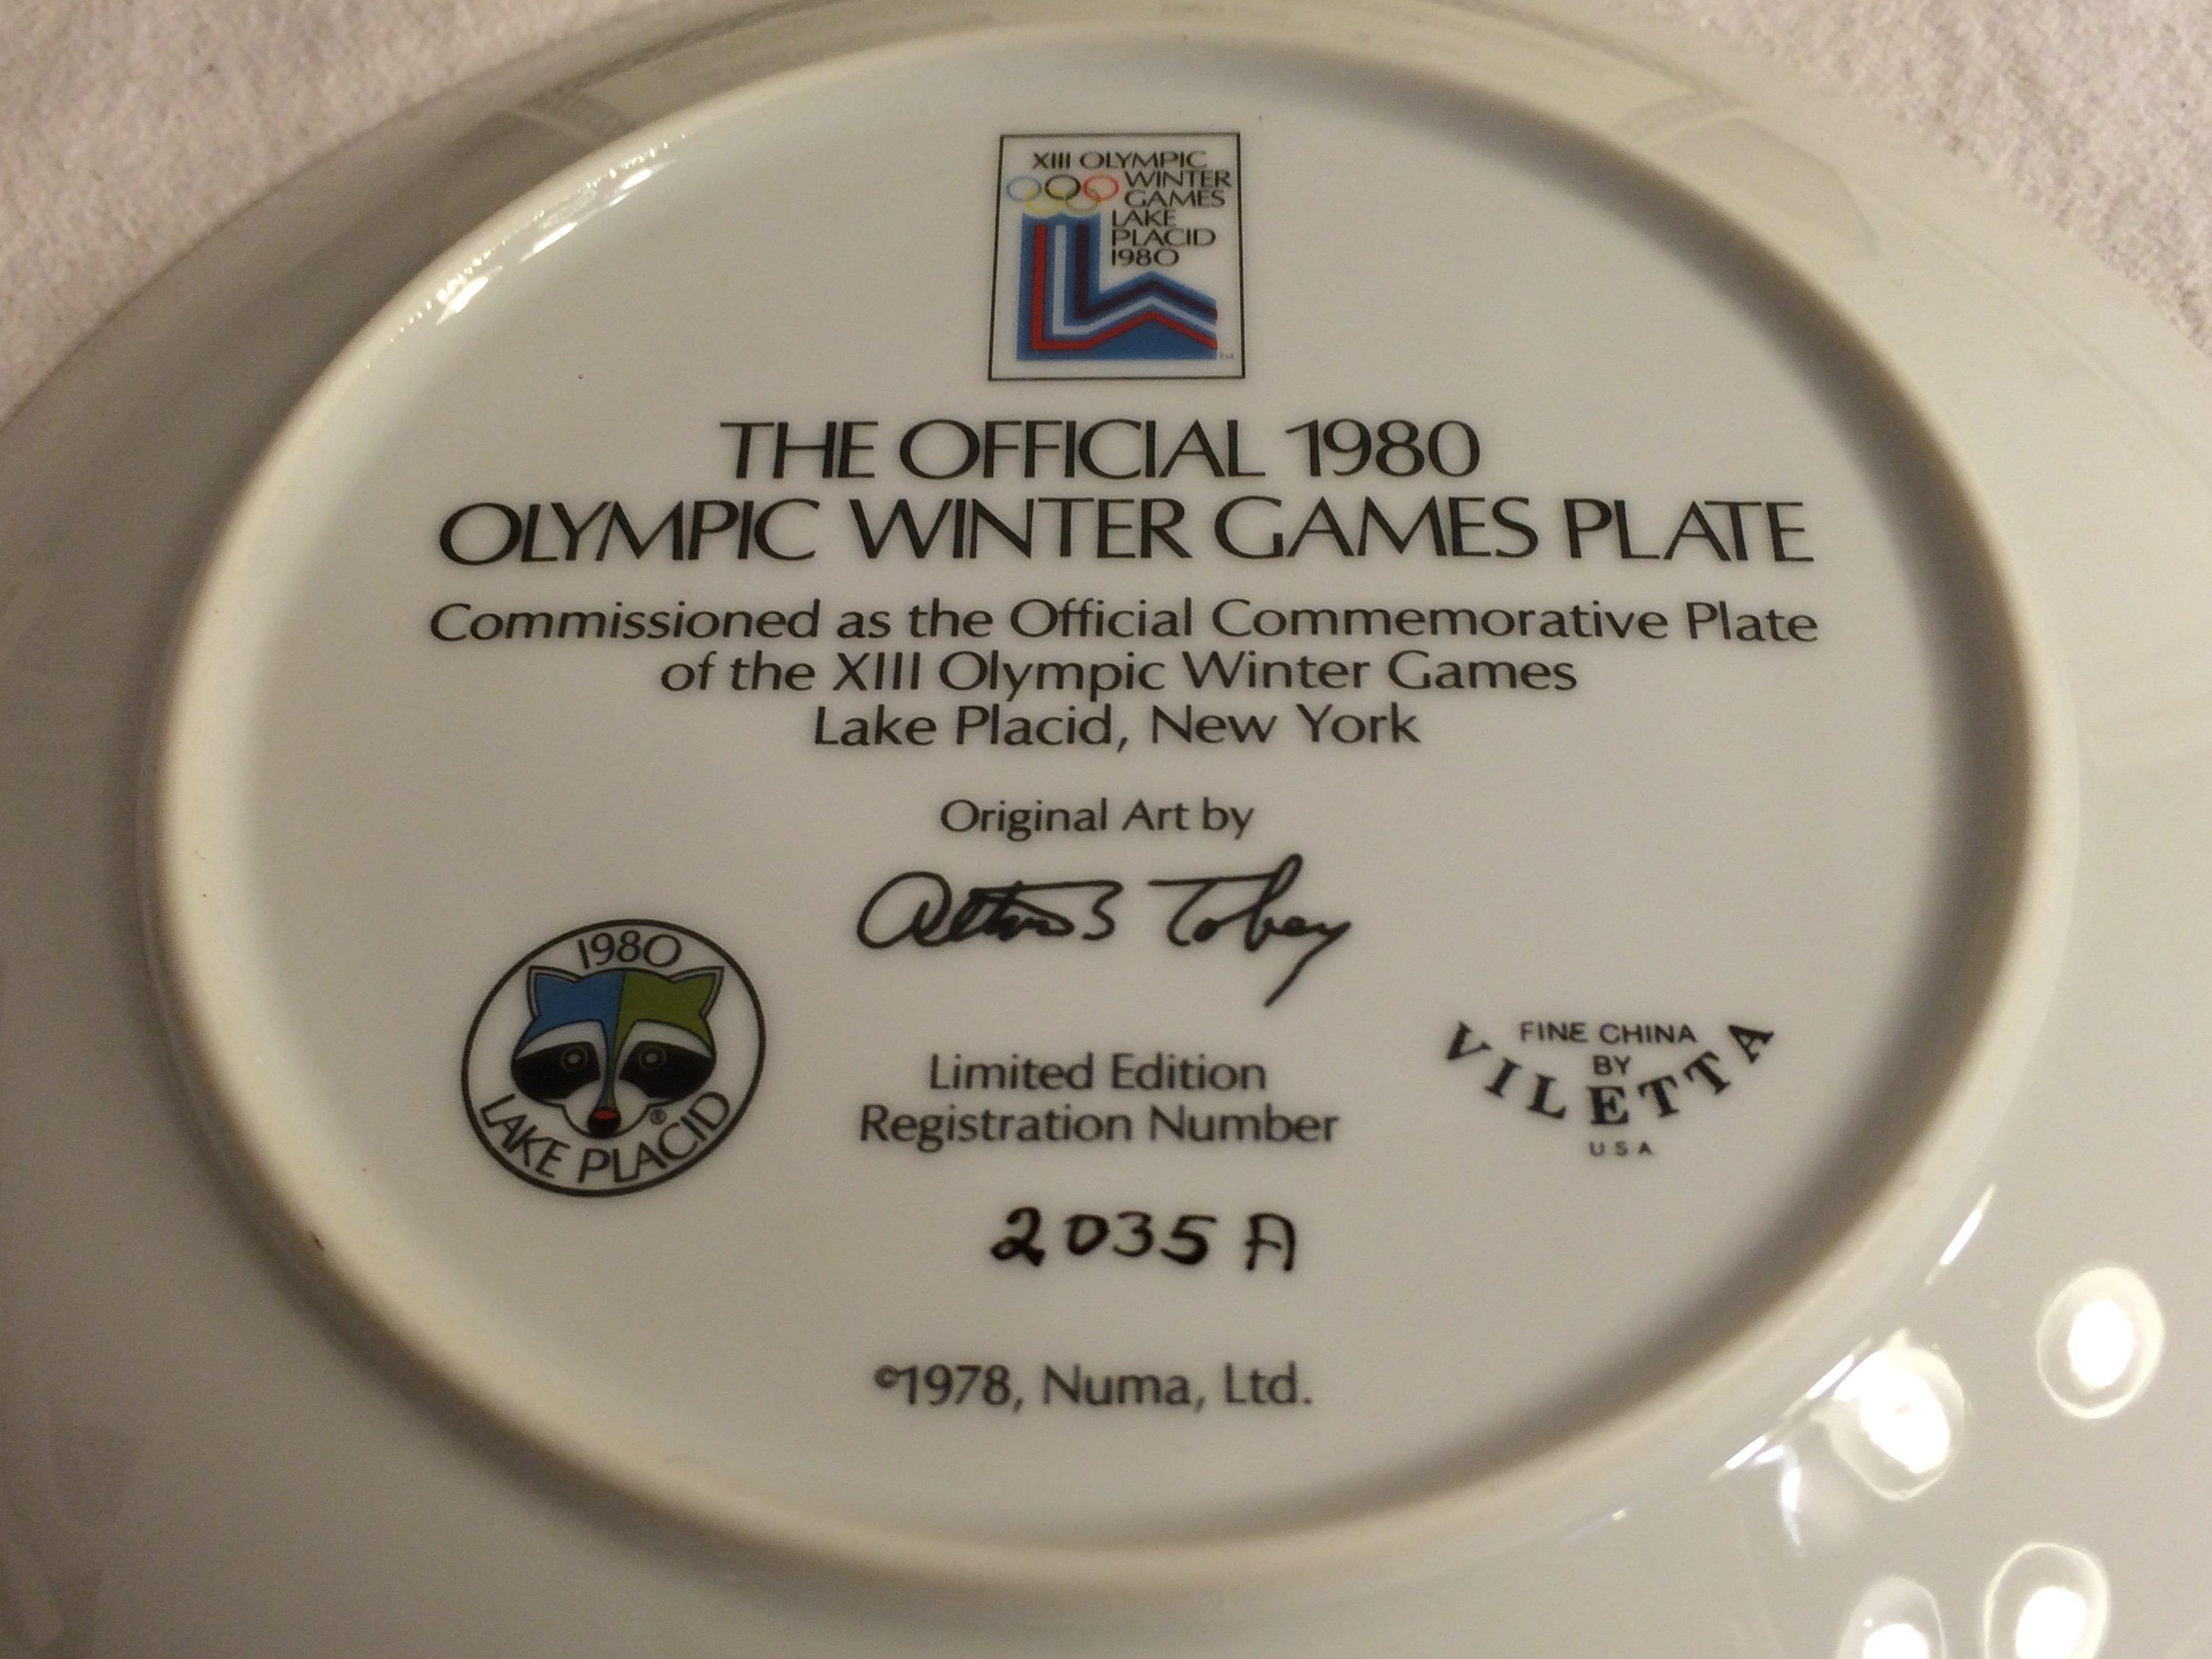 Collector Vintage 1980 Porcelain Plate The Official 1980 Olympic Winter Games Plate Size:8.5"Roun